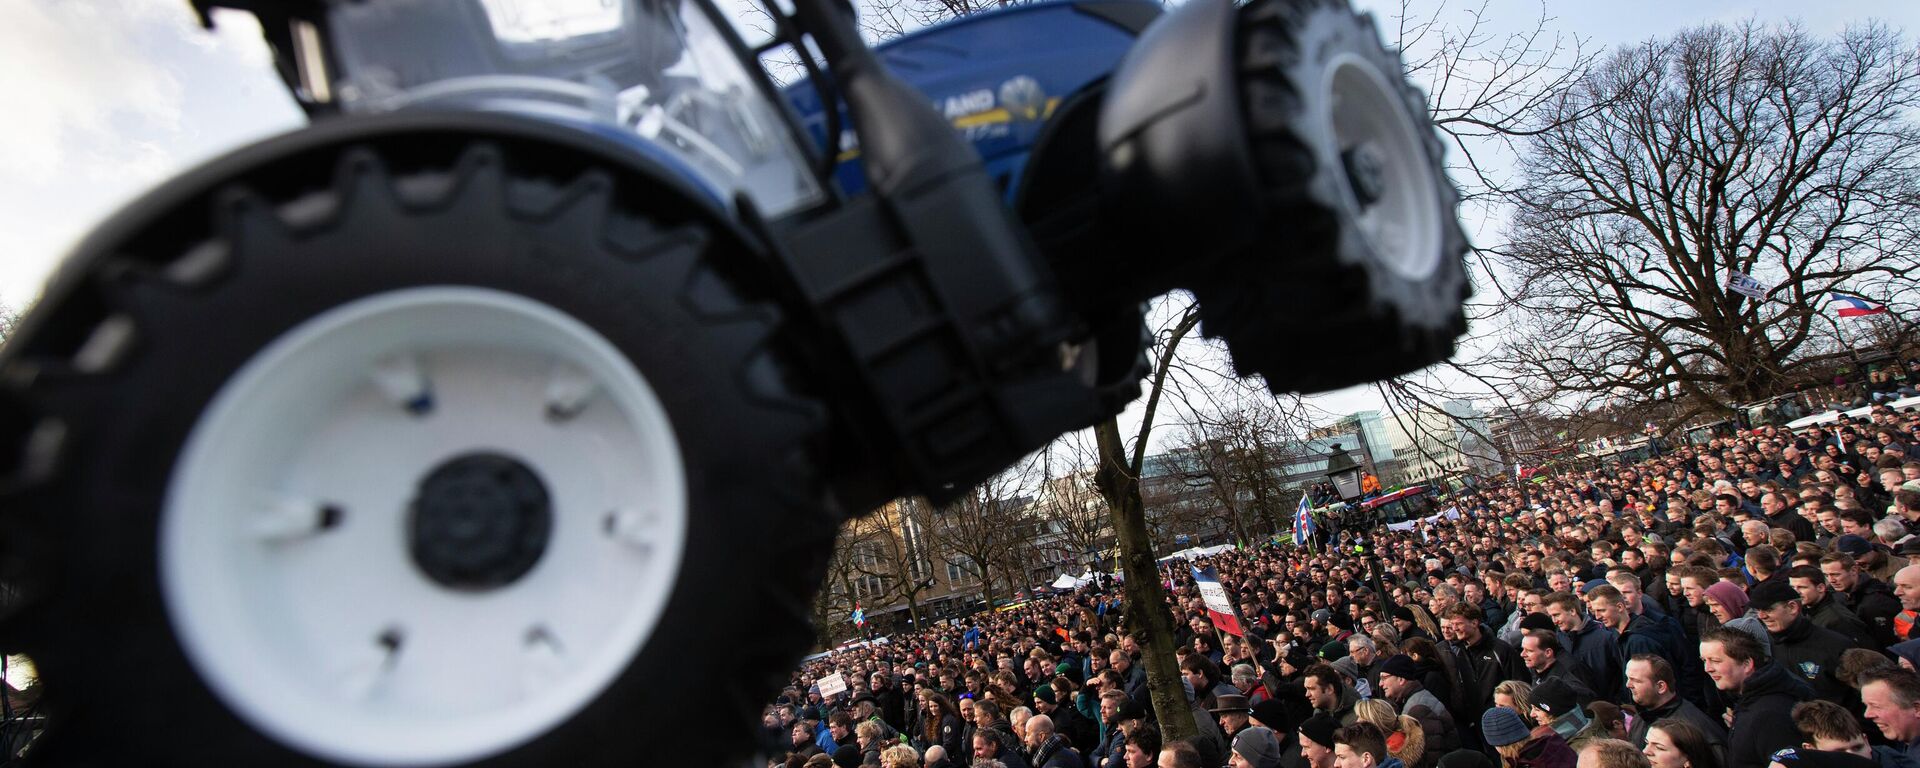 FILE - Some thousand of farmers converge on The Hague, Netherlands, Feb. 19, 2020, in the latest protest against the government's plans to rein in emissions of nitrogen oxide - Sputnik International, 1920, 29.06.2022